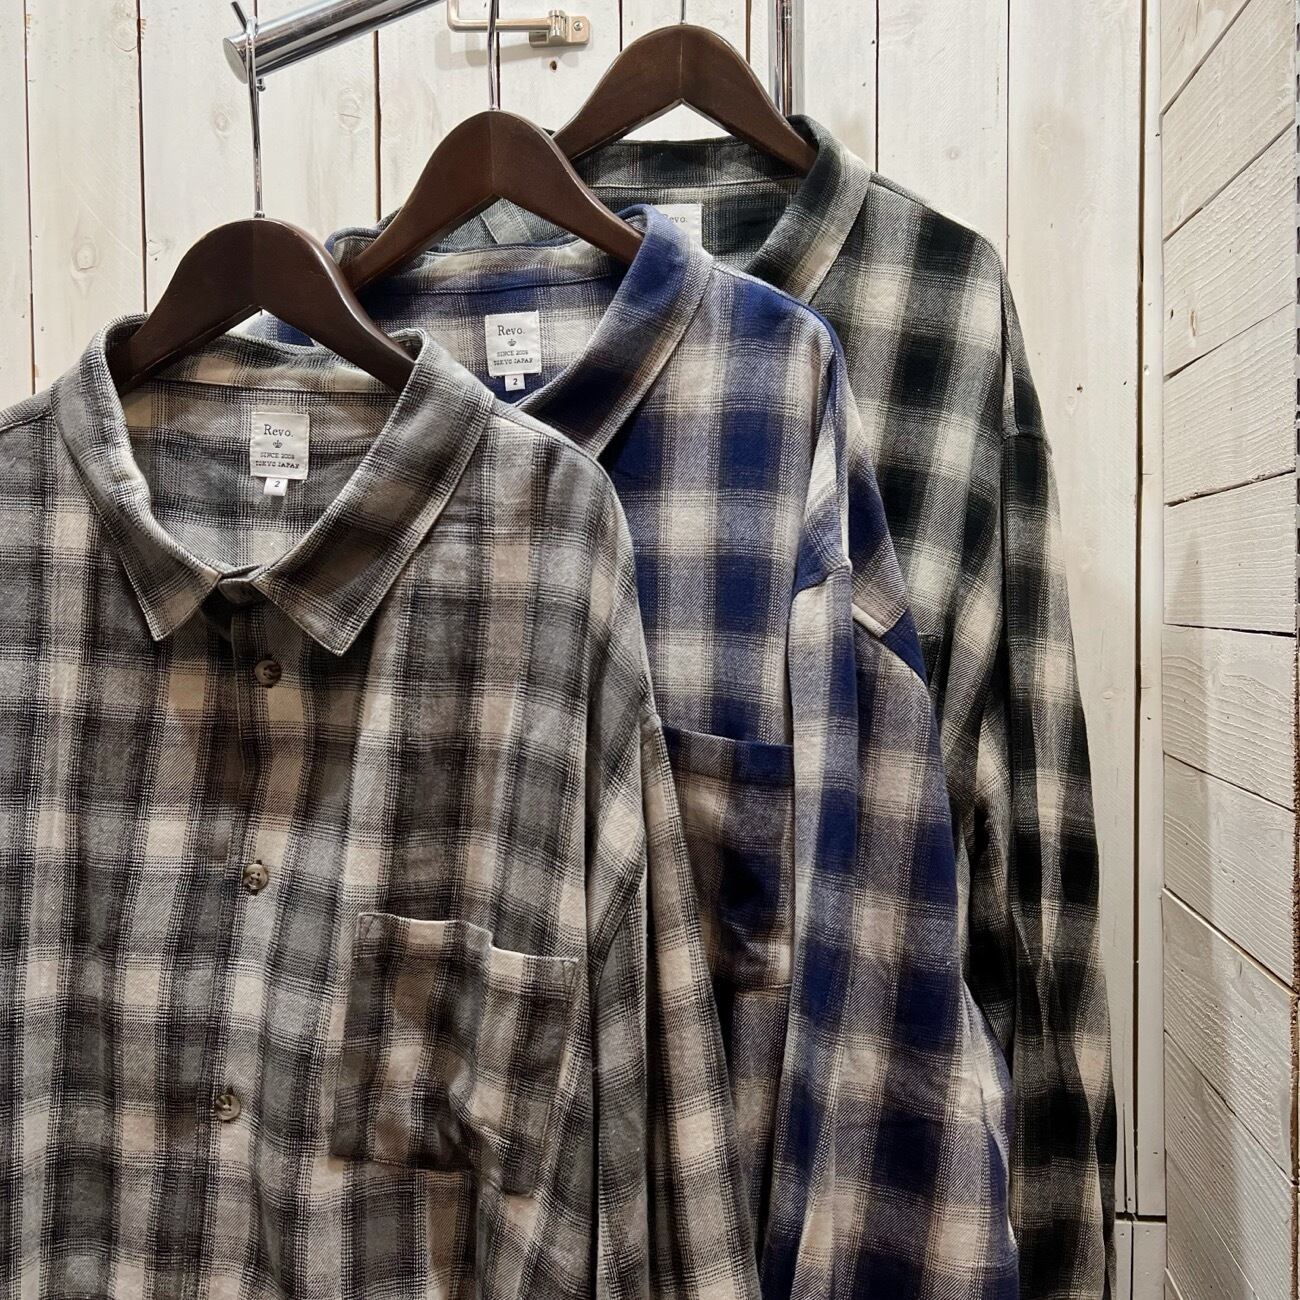 22813001-9】Loose Silhouette Ombre Check Long Sleeve Shirt ...